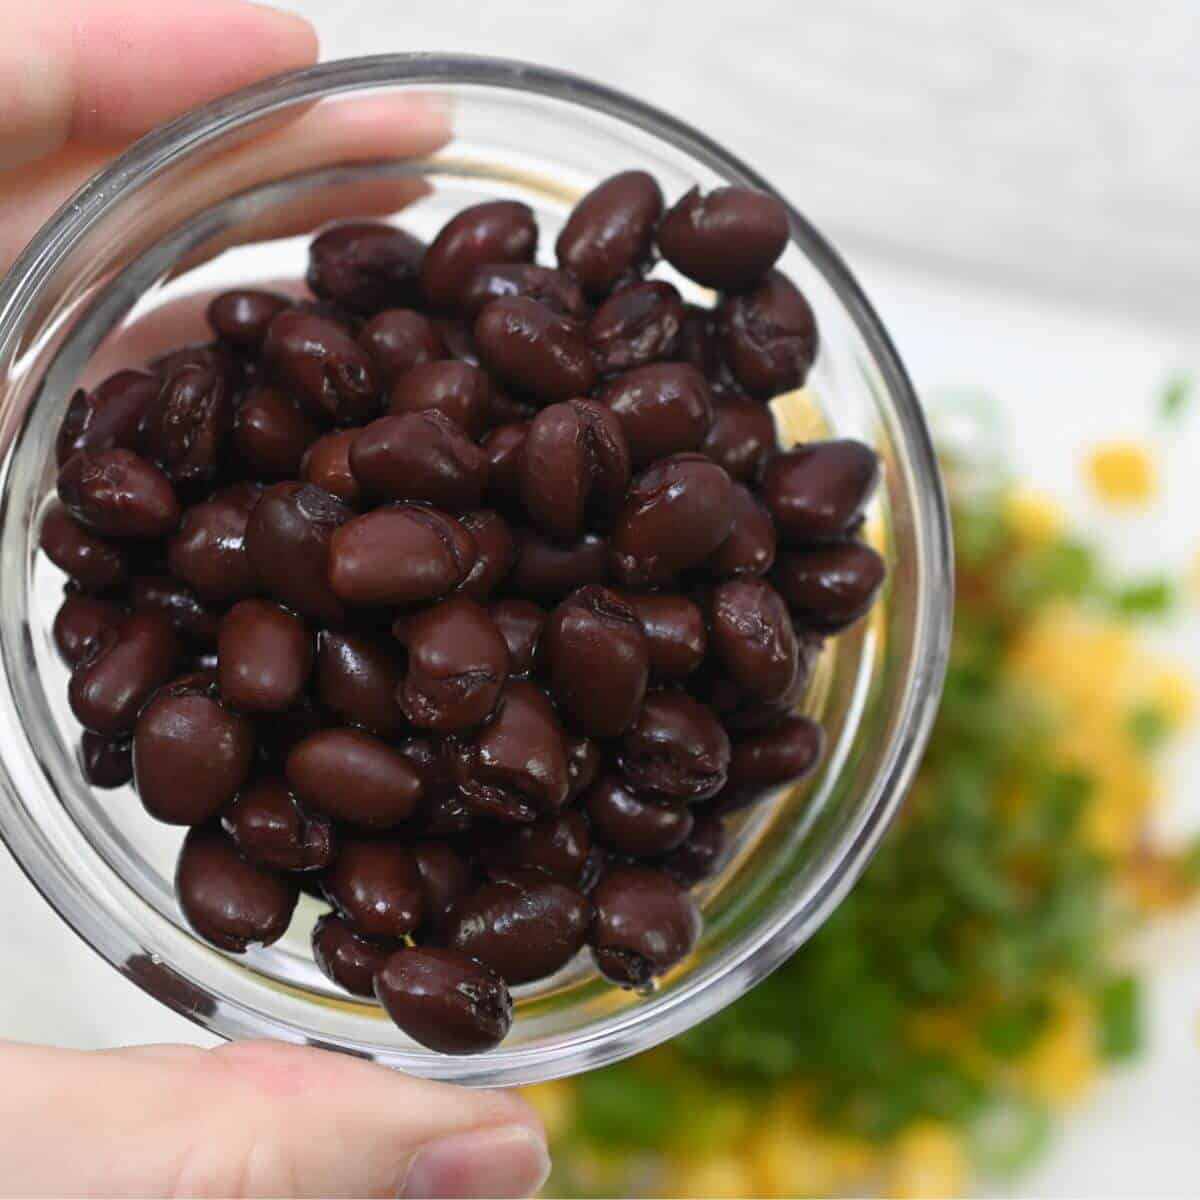 Black beans in a glass bowl.